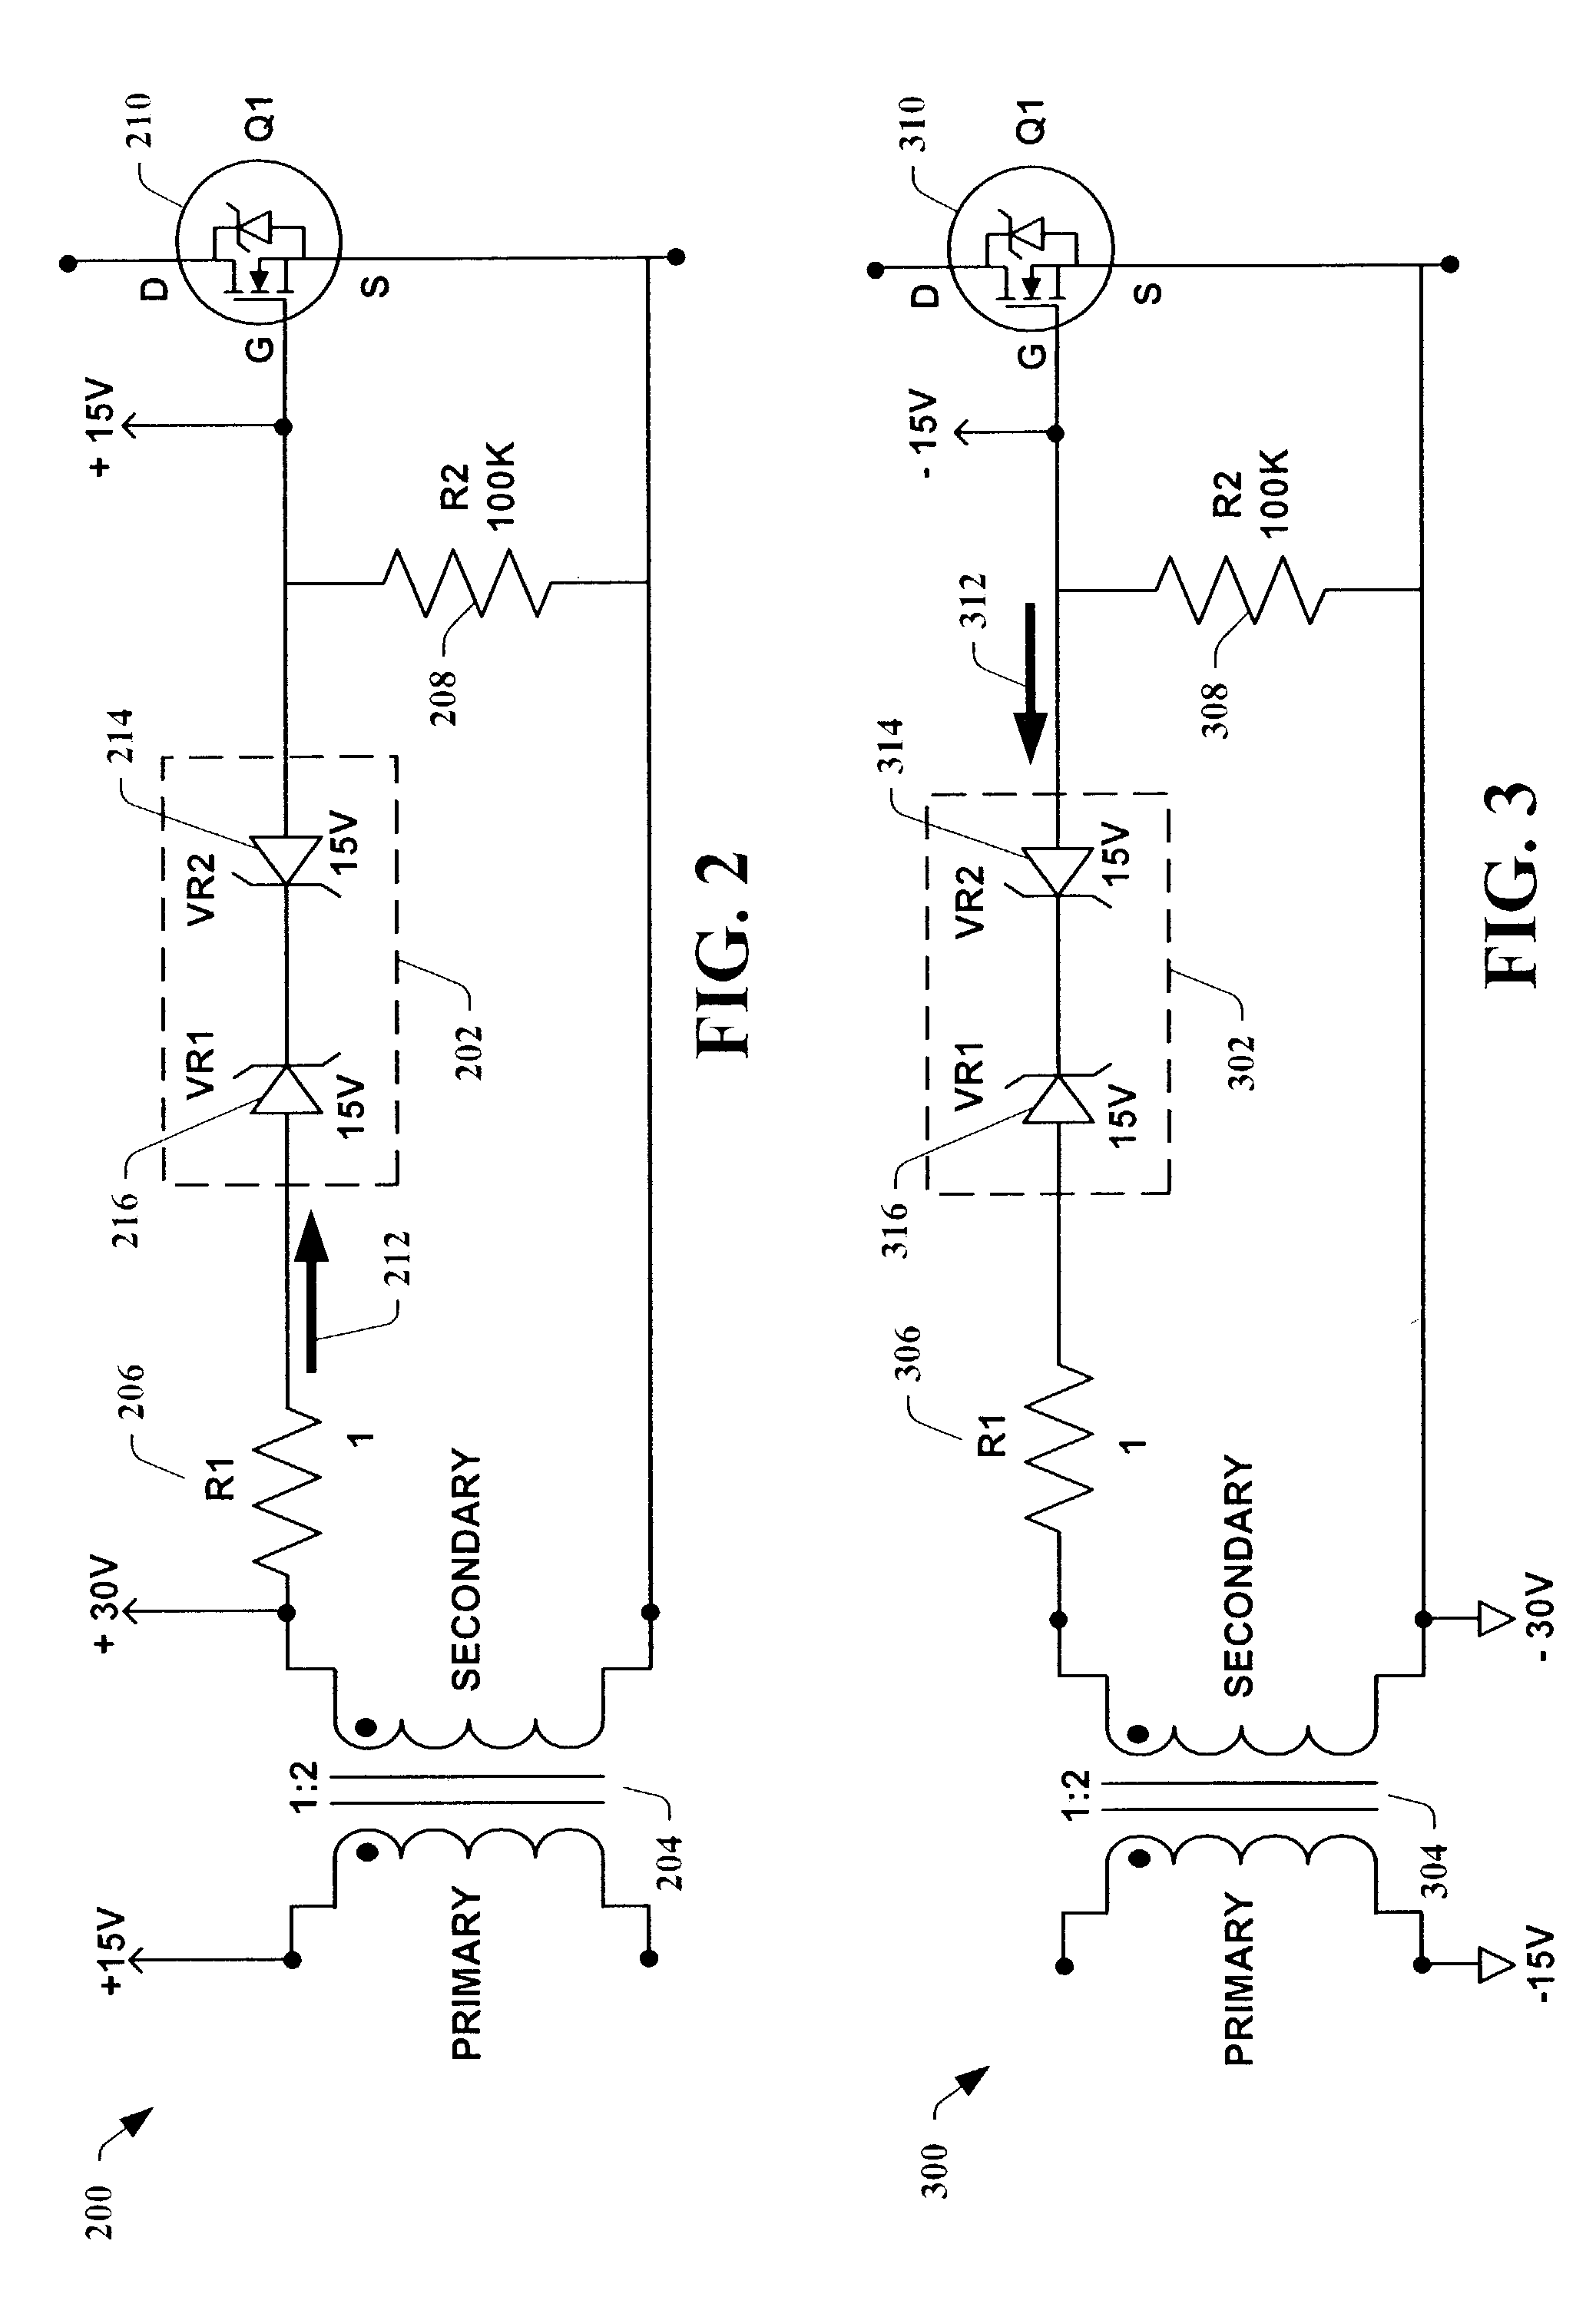 Isolated FET drive utilizing Zener diode based systems, methods and apparatus